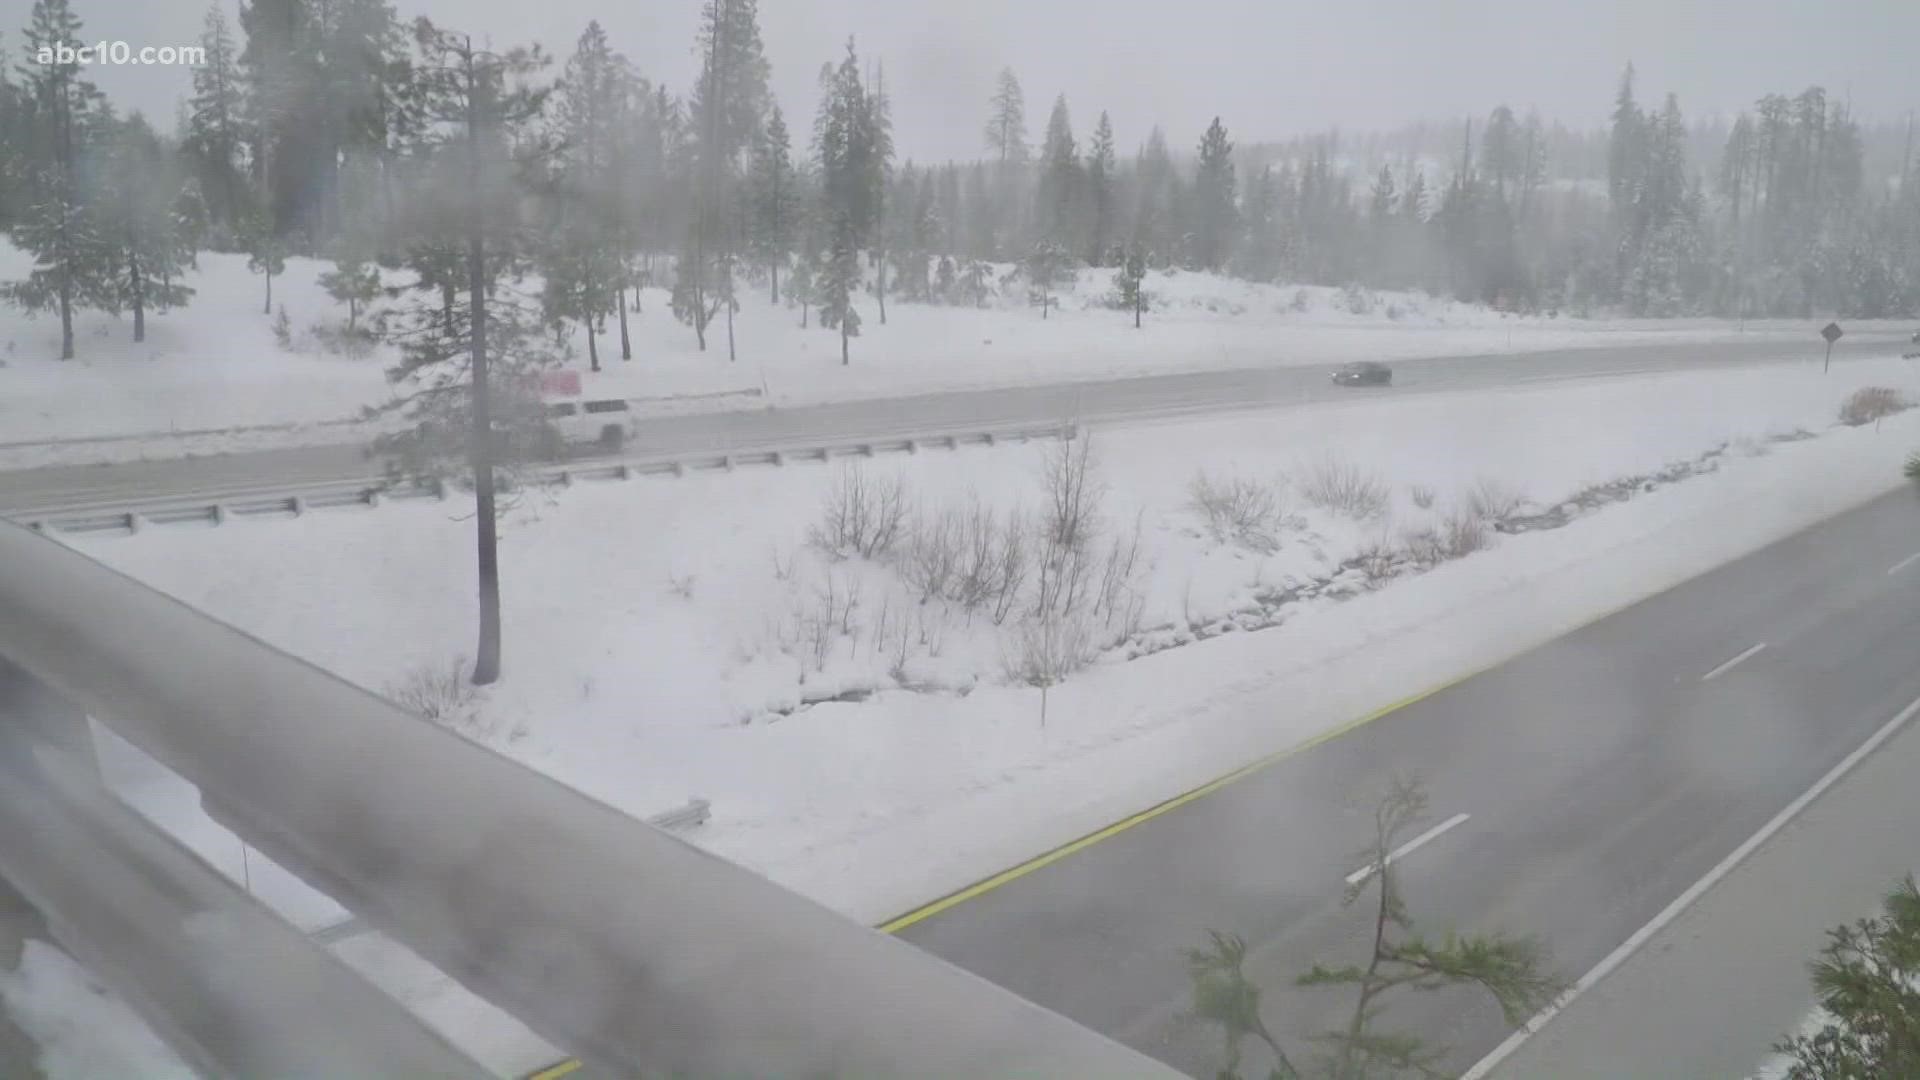 At the Yuba Pass exit on I-80, our Becca Habegger shows us the snow plows, heavy winds and ongoing snow fall hitting drivers on Monday.